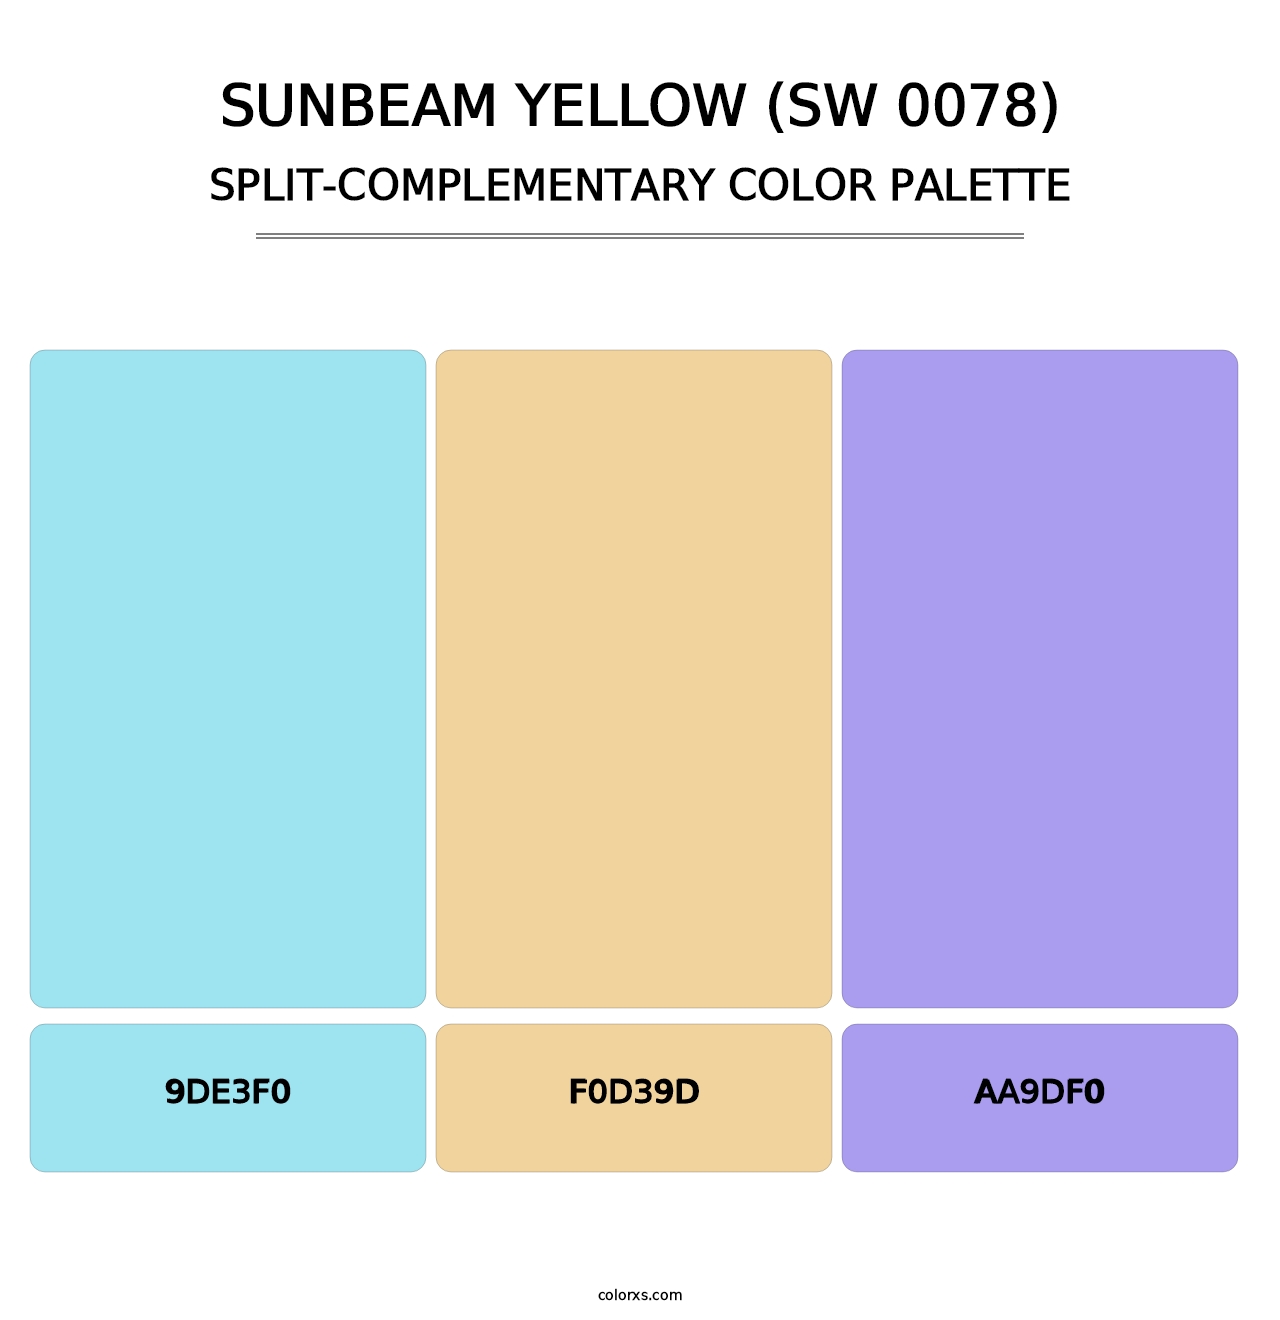 Sunbeam Yellow (SW 0078) - Split-Complementary Color Palette